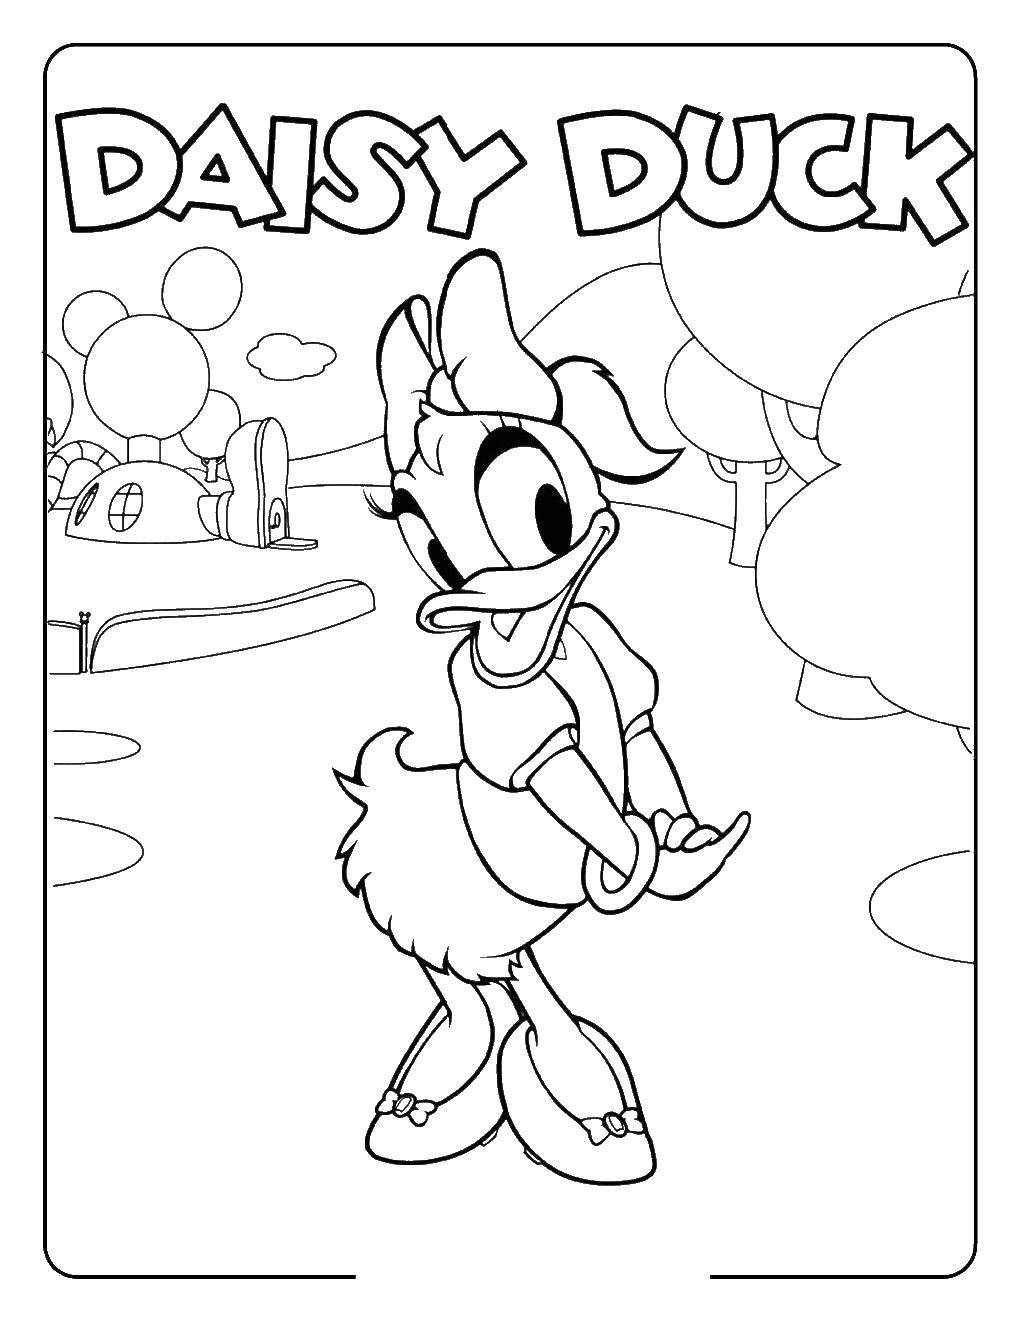 Coloring Daisy. Category Cartoon character. Tags:  Disney, Ducktales, Donald Duck.